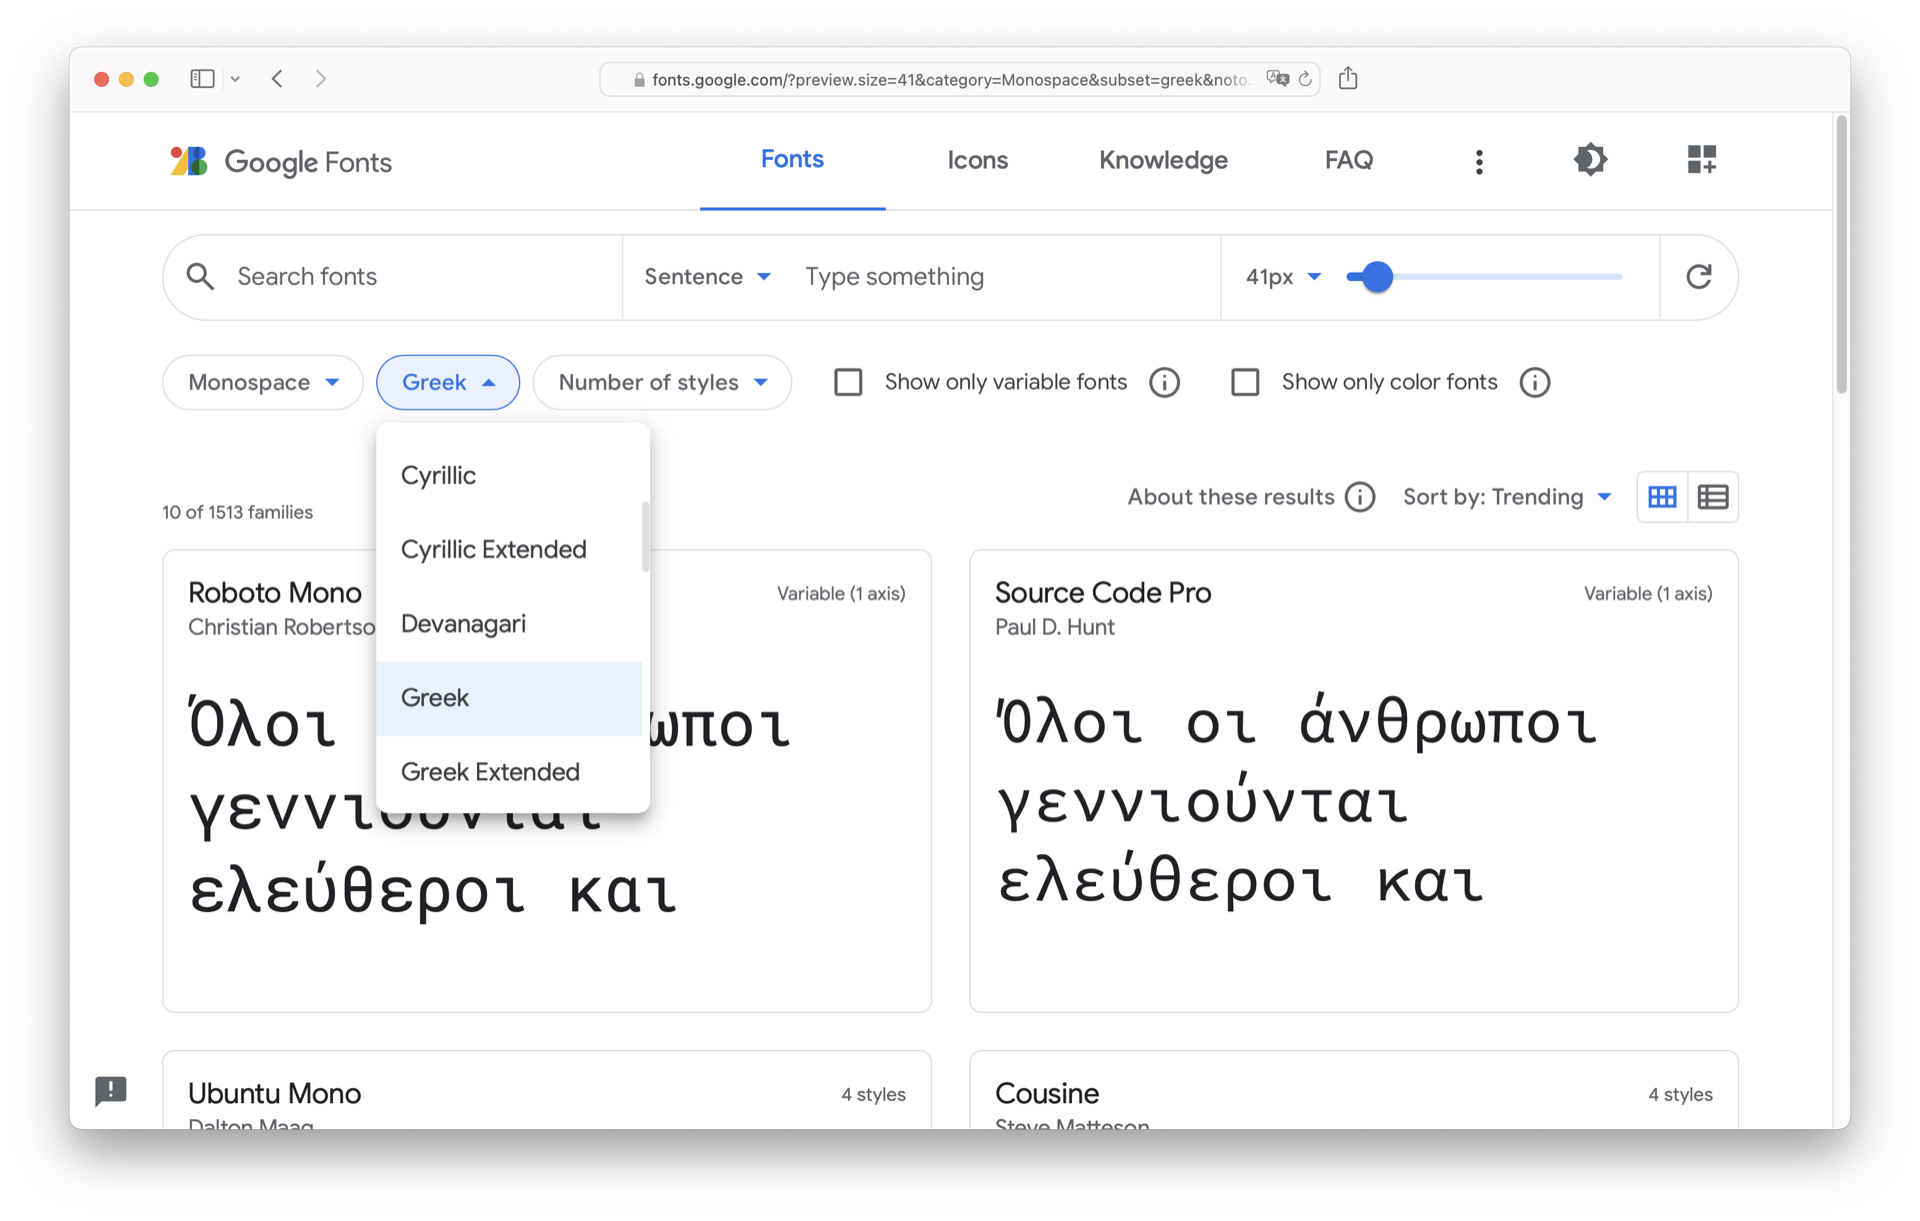 Screenshot of the Google Fonts Website with the filter for language support